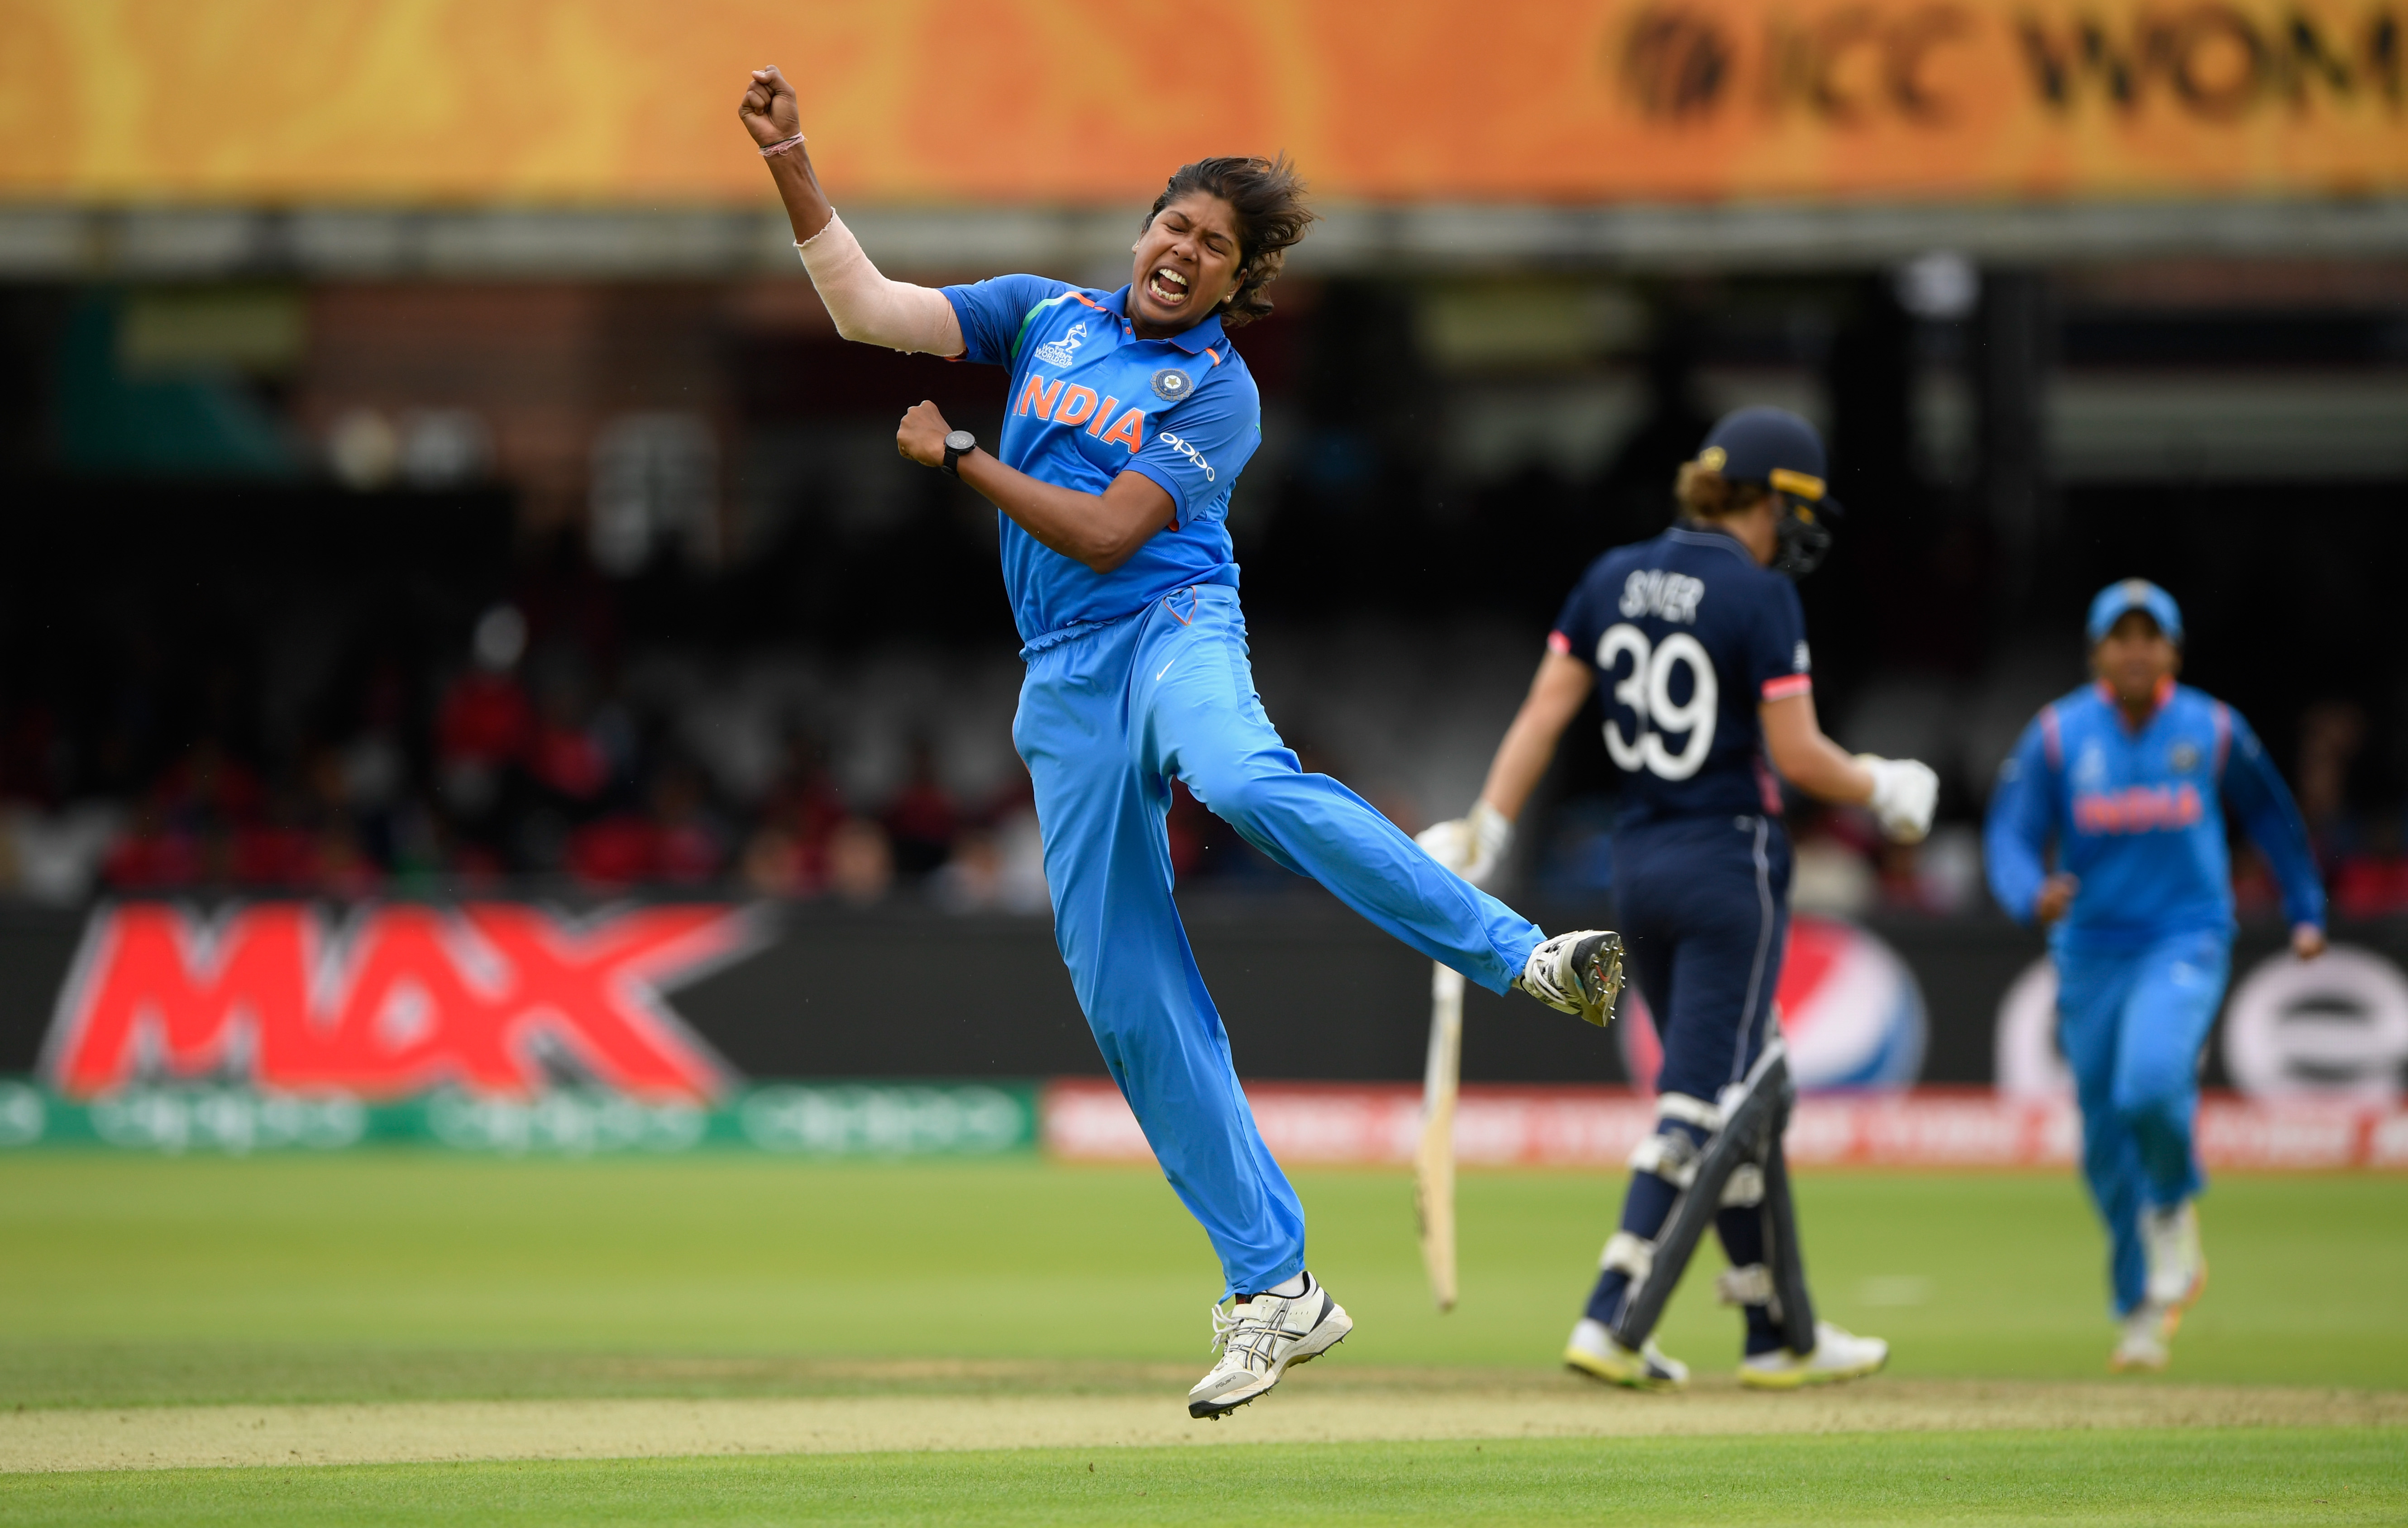 Jhulan Goswami reclaims No. 1 spot in ODI bowlers rankings after England heroics